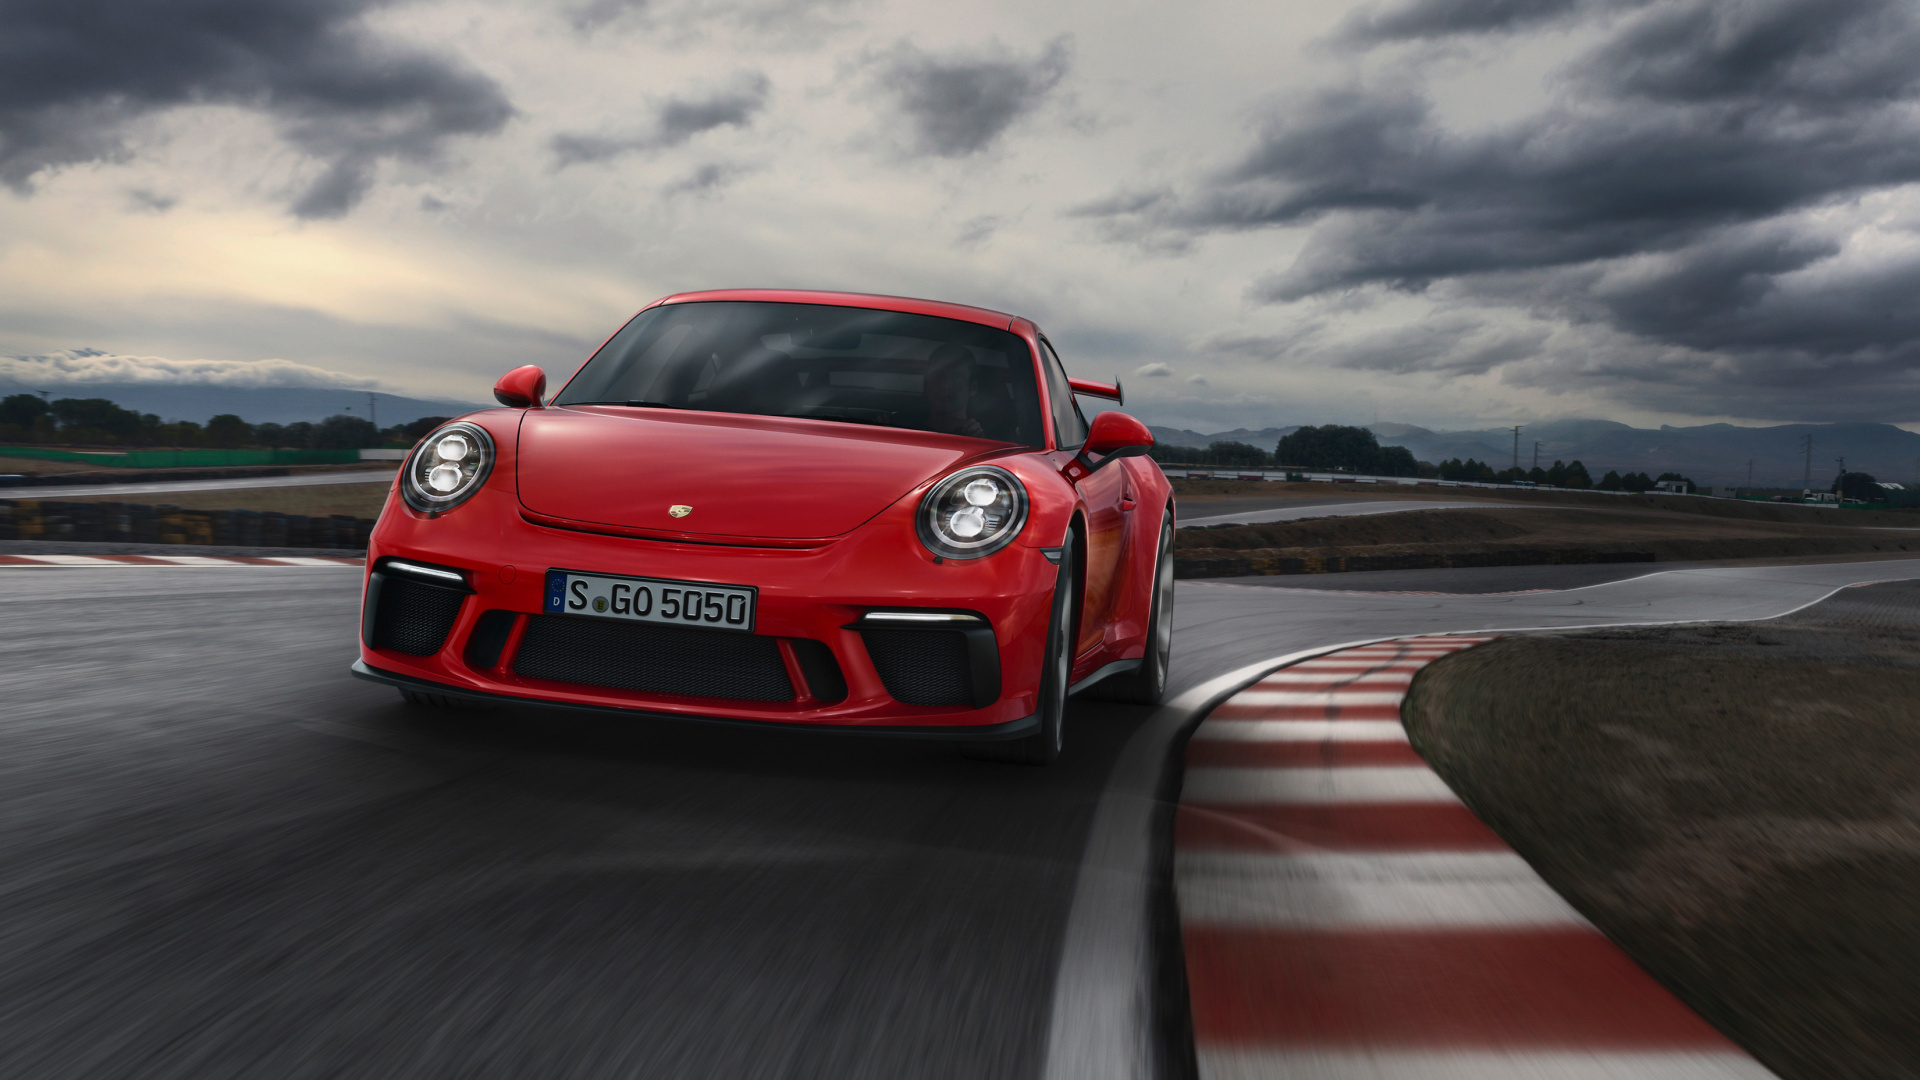 Red Porsche 911 on Road Under Cloudy Sky. Wallpaper in 1920x1080 Resolution